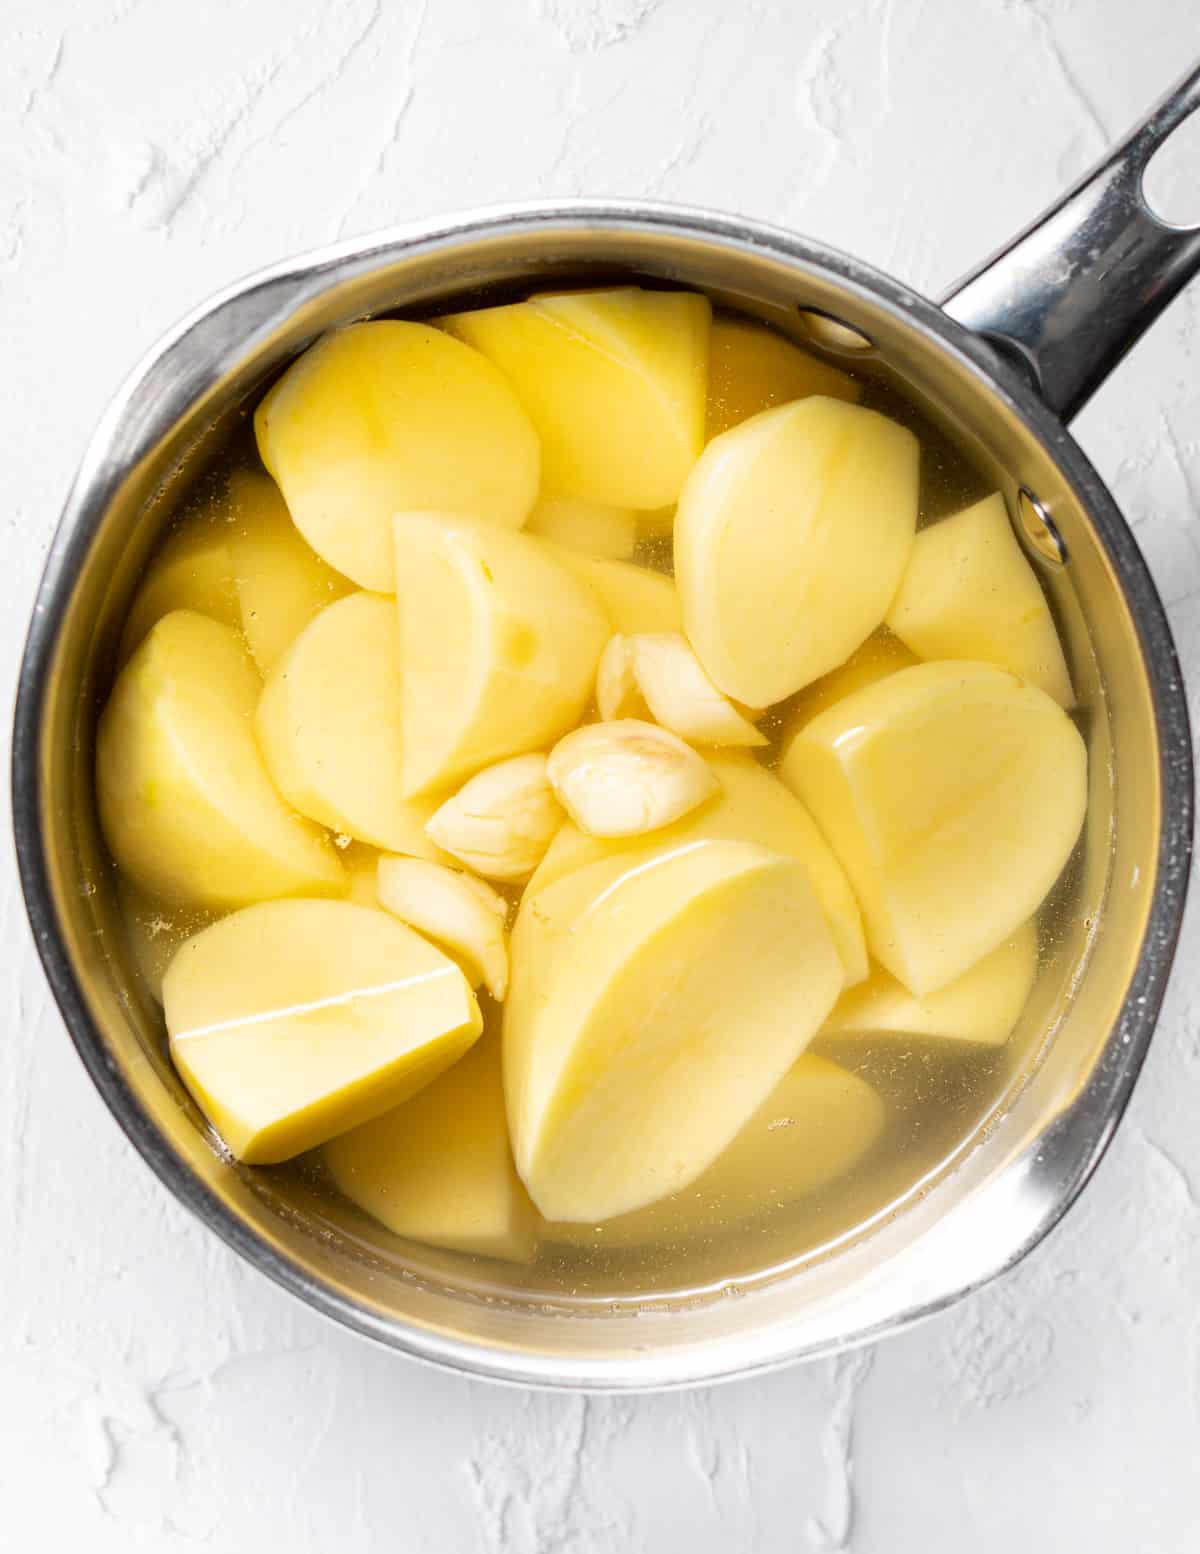 potatoes and garlic in a pan of water